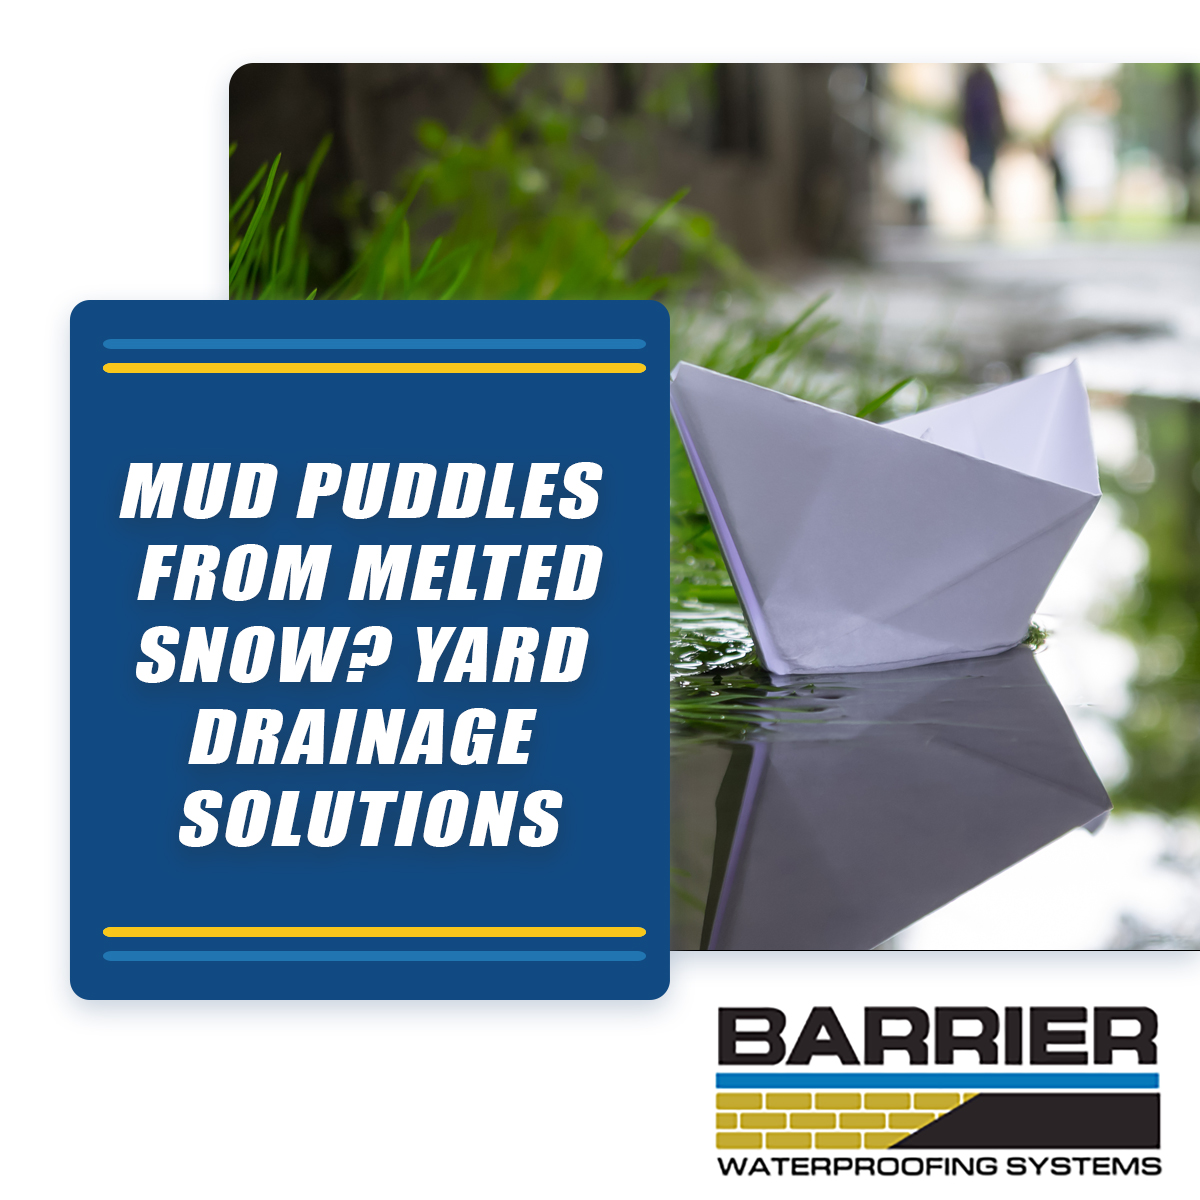 Mud-Puddles-From-Melted-Snow-Yard-Drainage-Solutions